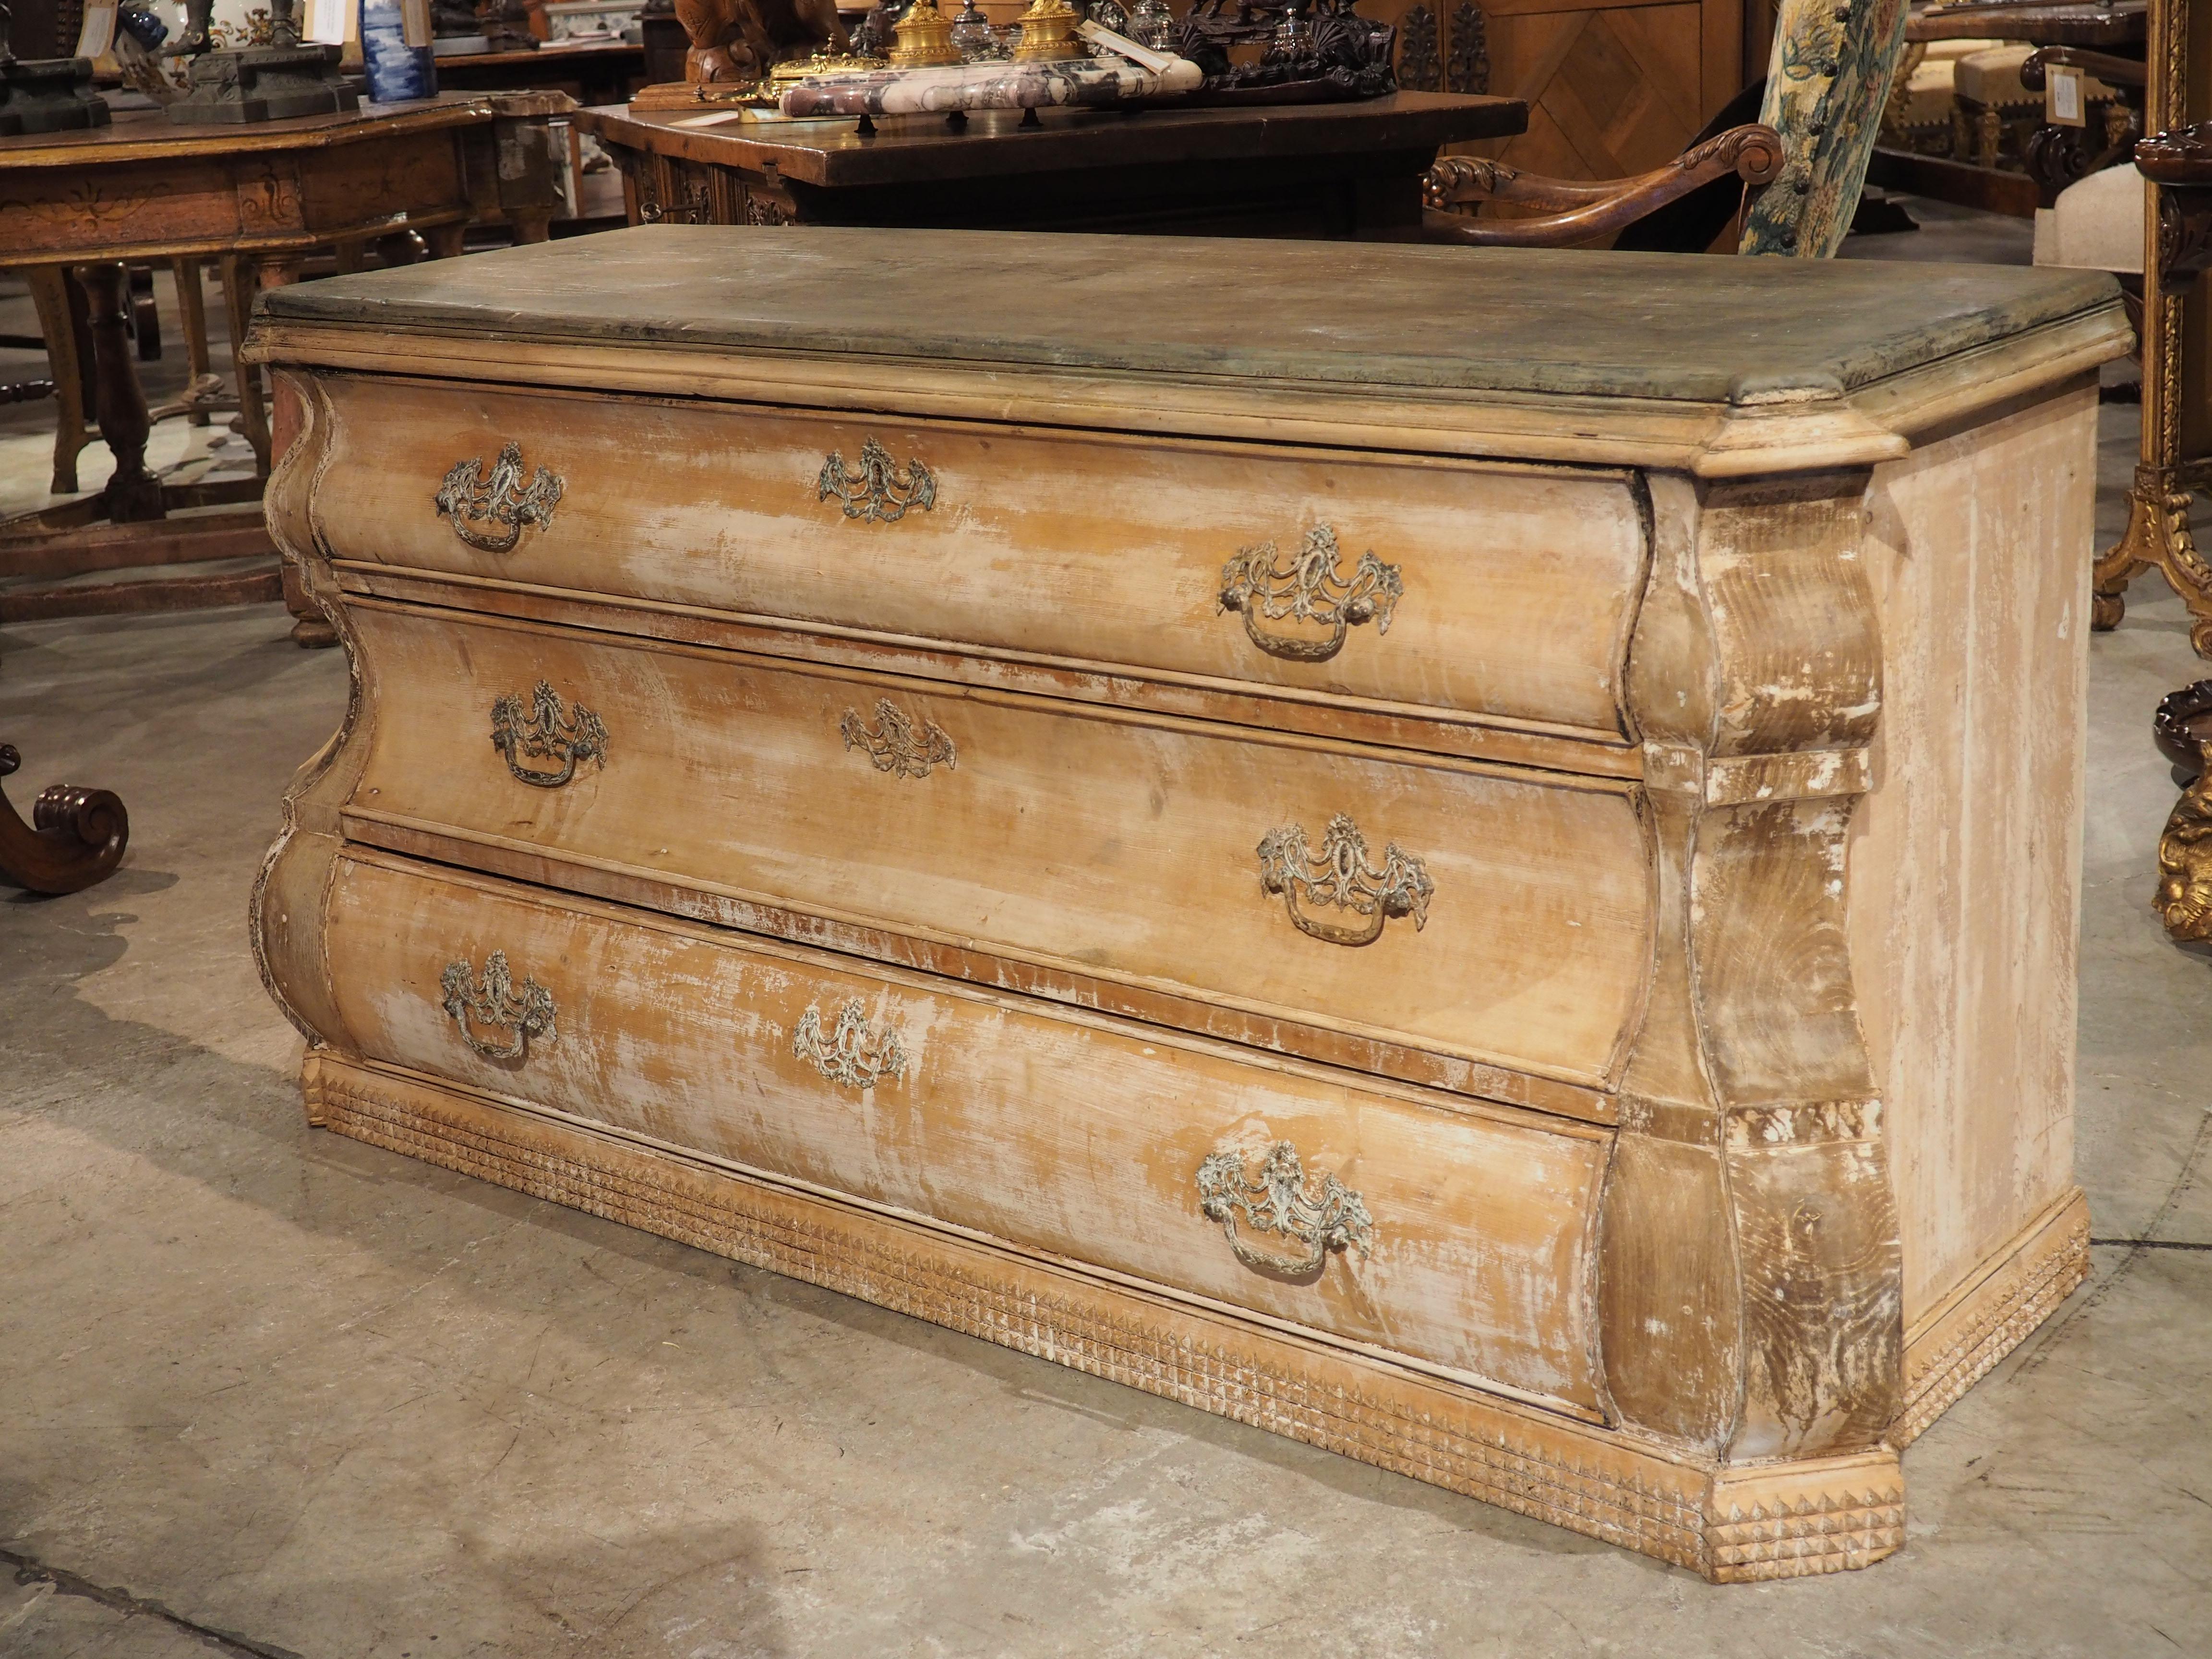 This exquisite Dutch chest of drawers, with its unique shape and finish , measures nearly 5 1/2 feet long. The chest features a bombe front with protruding pilasters that add a sense of grandeur to its design. The middle drawer boasts a concave